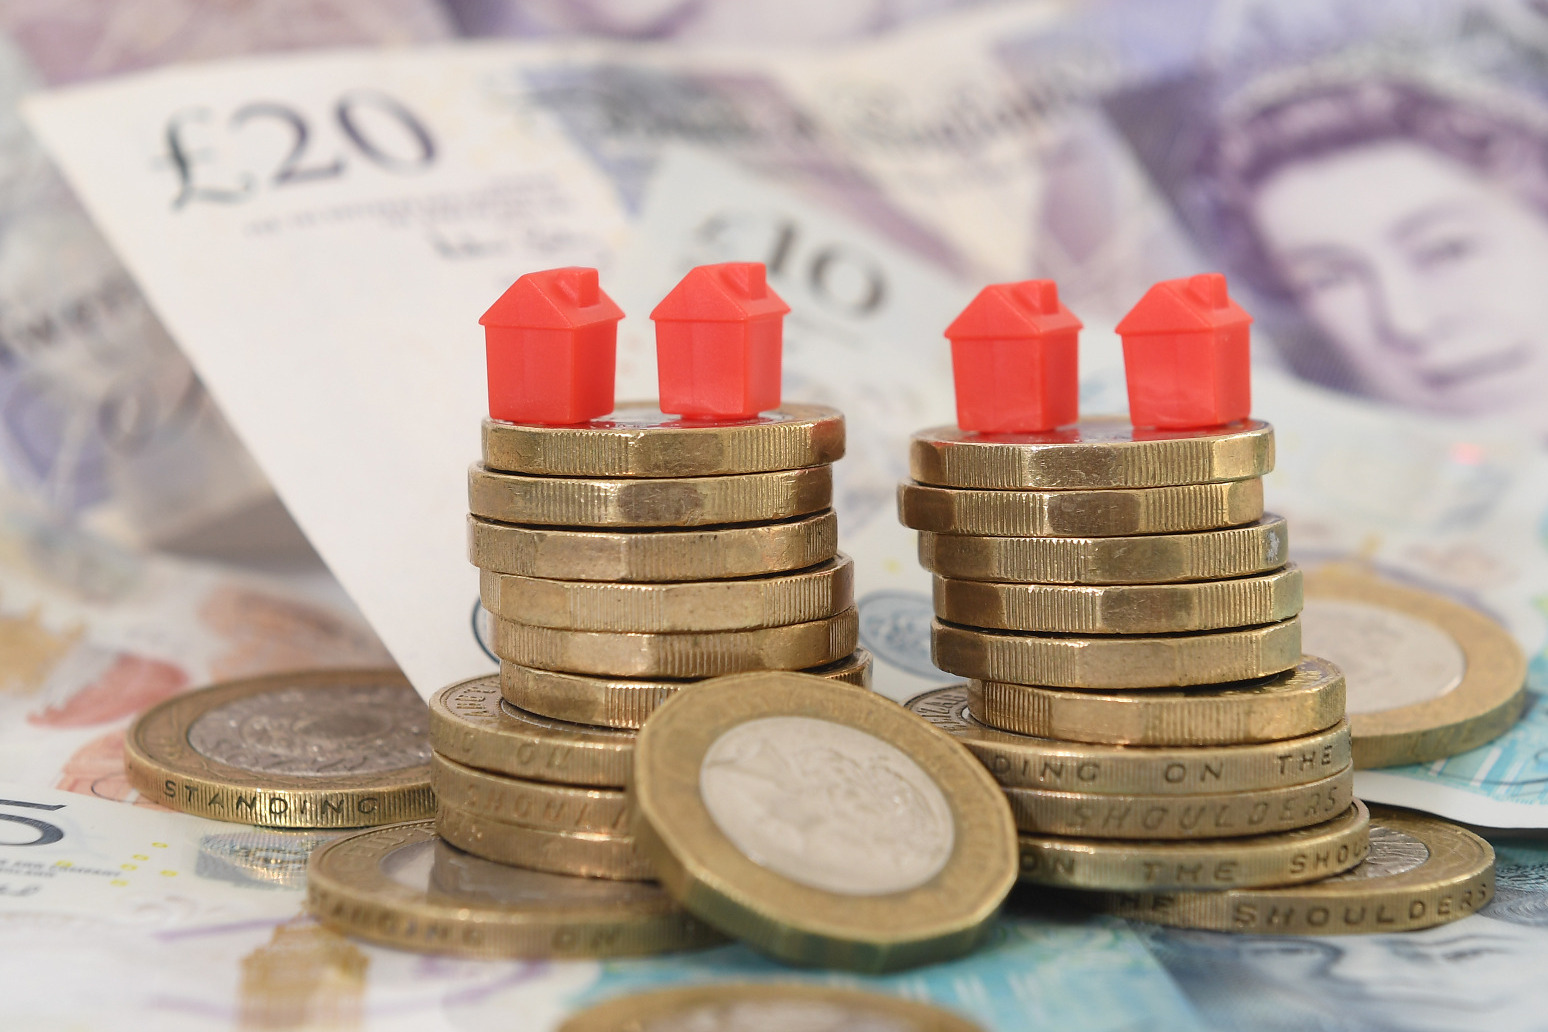 Net UK housing wealth ‘exceeded £7 trillion for the first time last year’ 